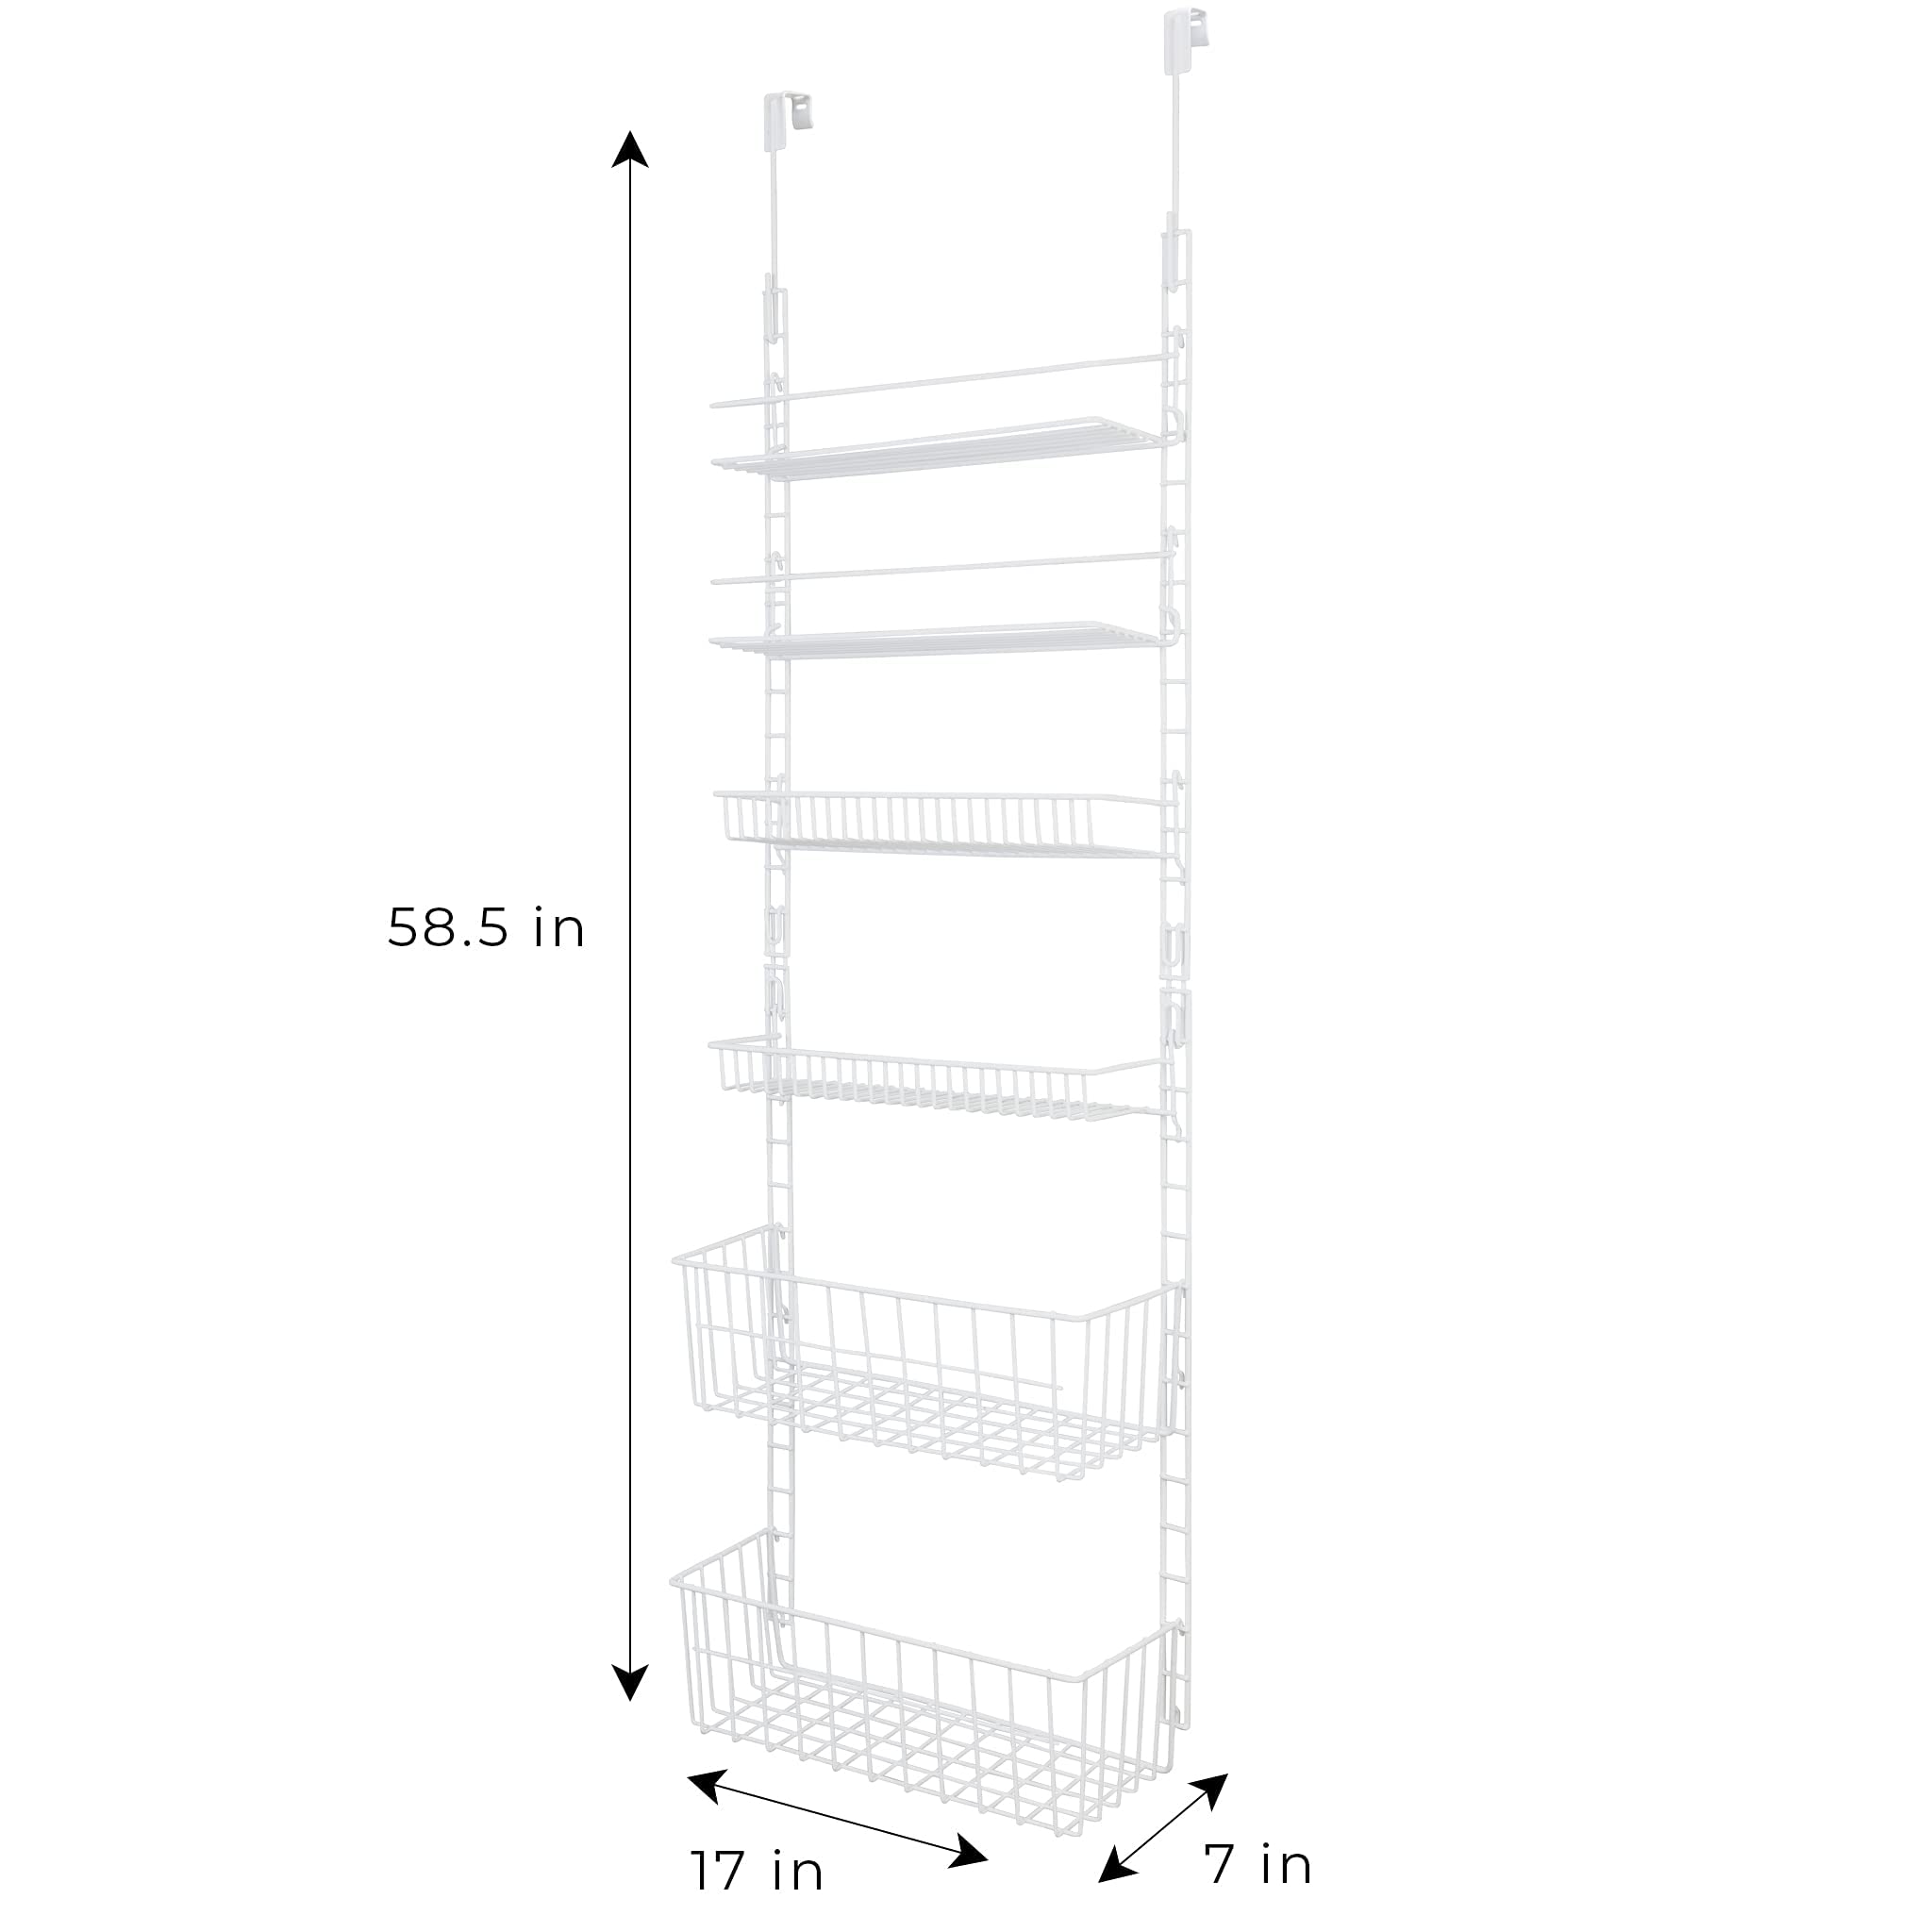 Smart Design Over The Door Pantry Organizer Rack with 6 Adjustable Shelves - Steel Metal Wire Baskets and Frame - Hanging - Wall Mountable - Cans, Spice, Storage, Closet, Bathroom, Kitchen - White